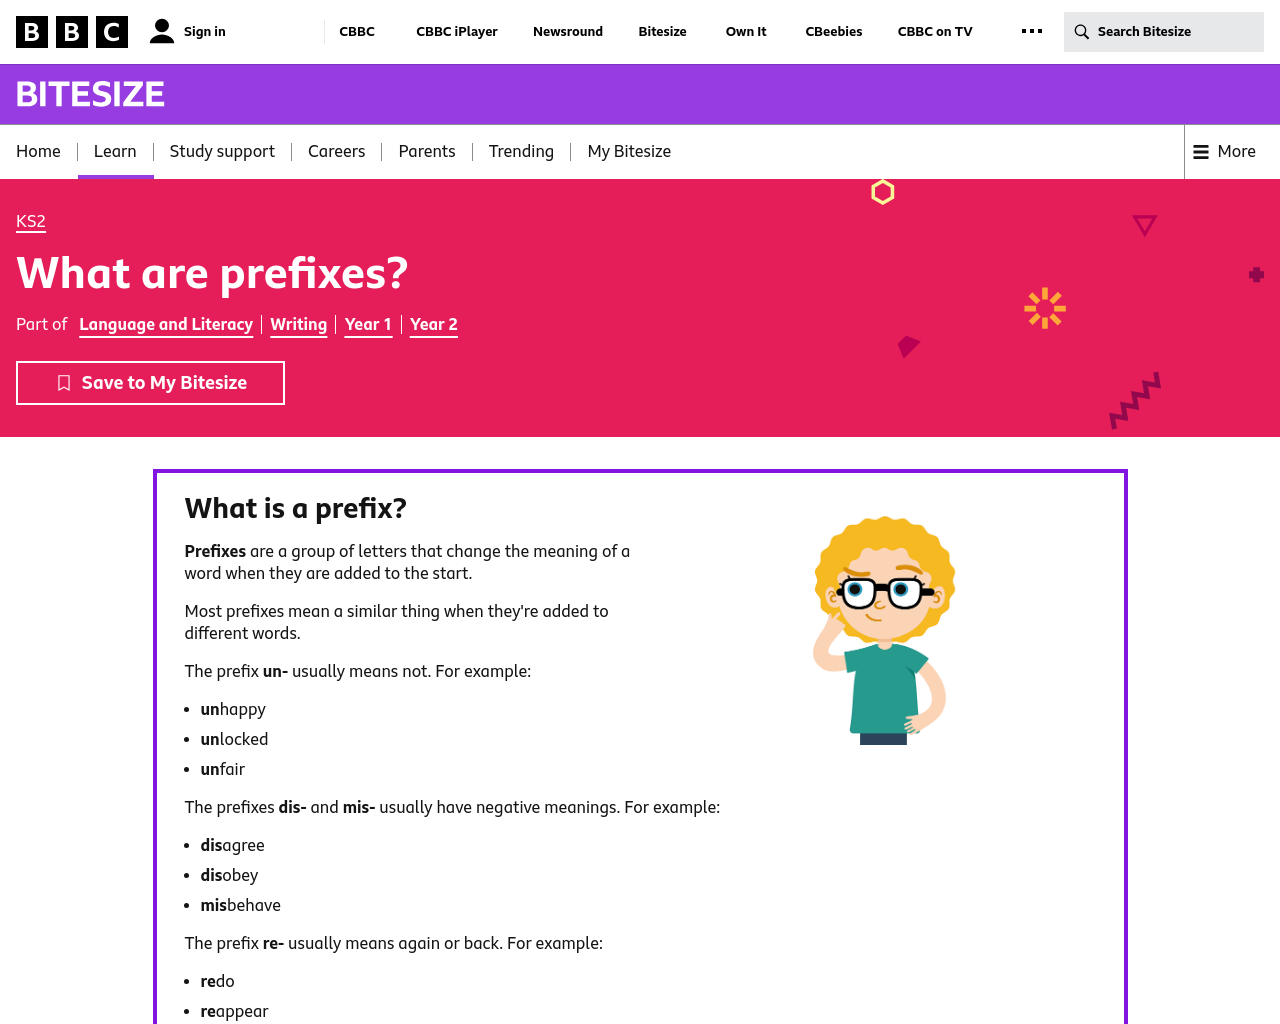 What are prefixes?